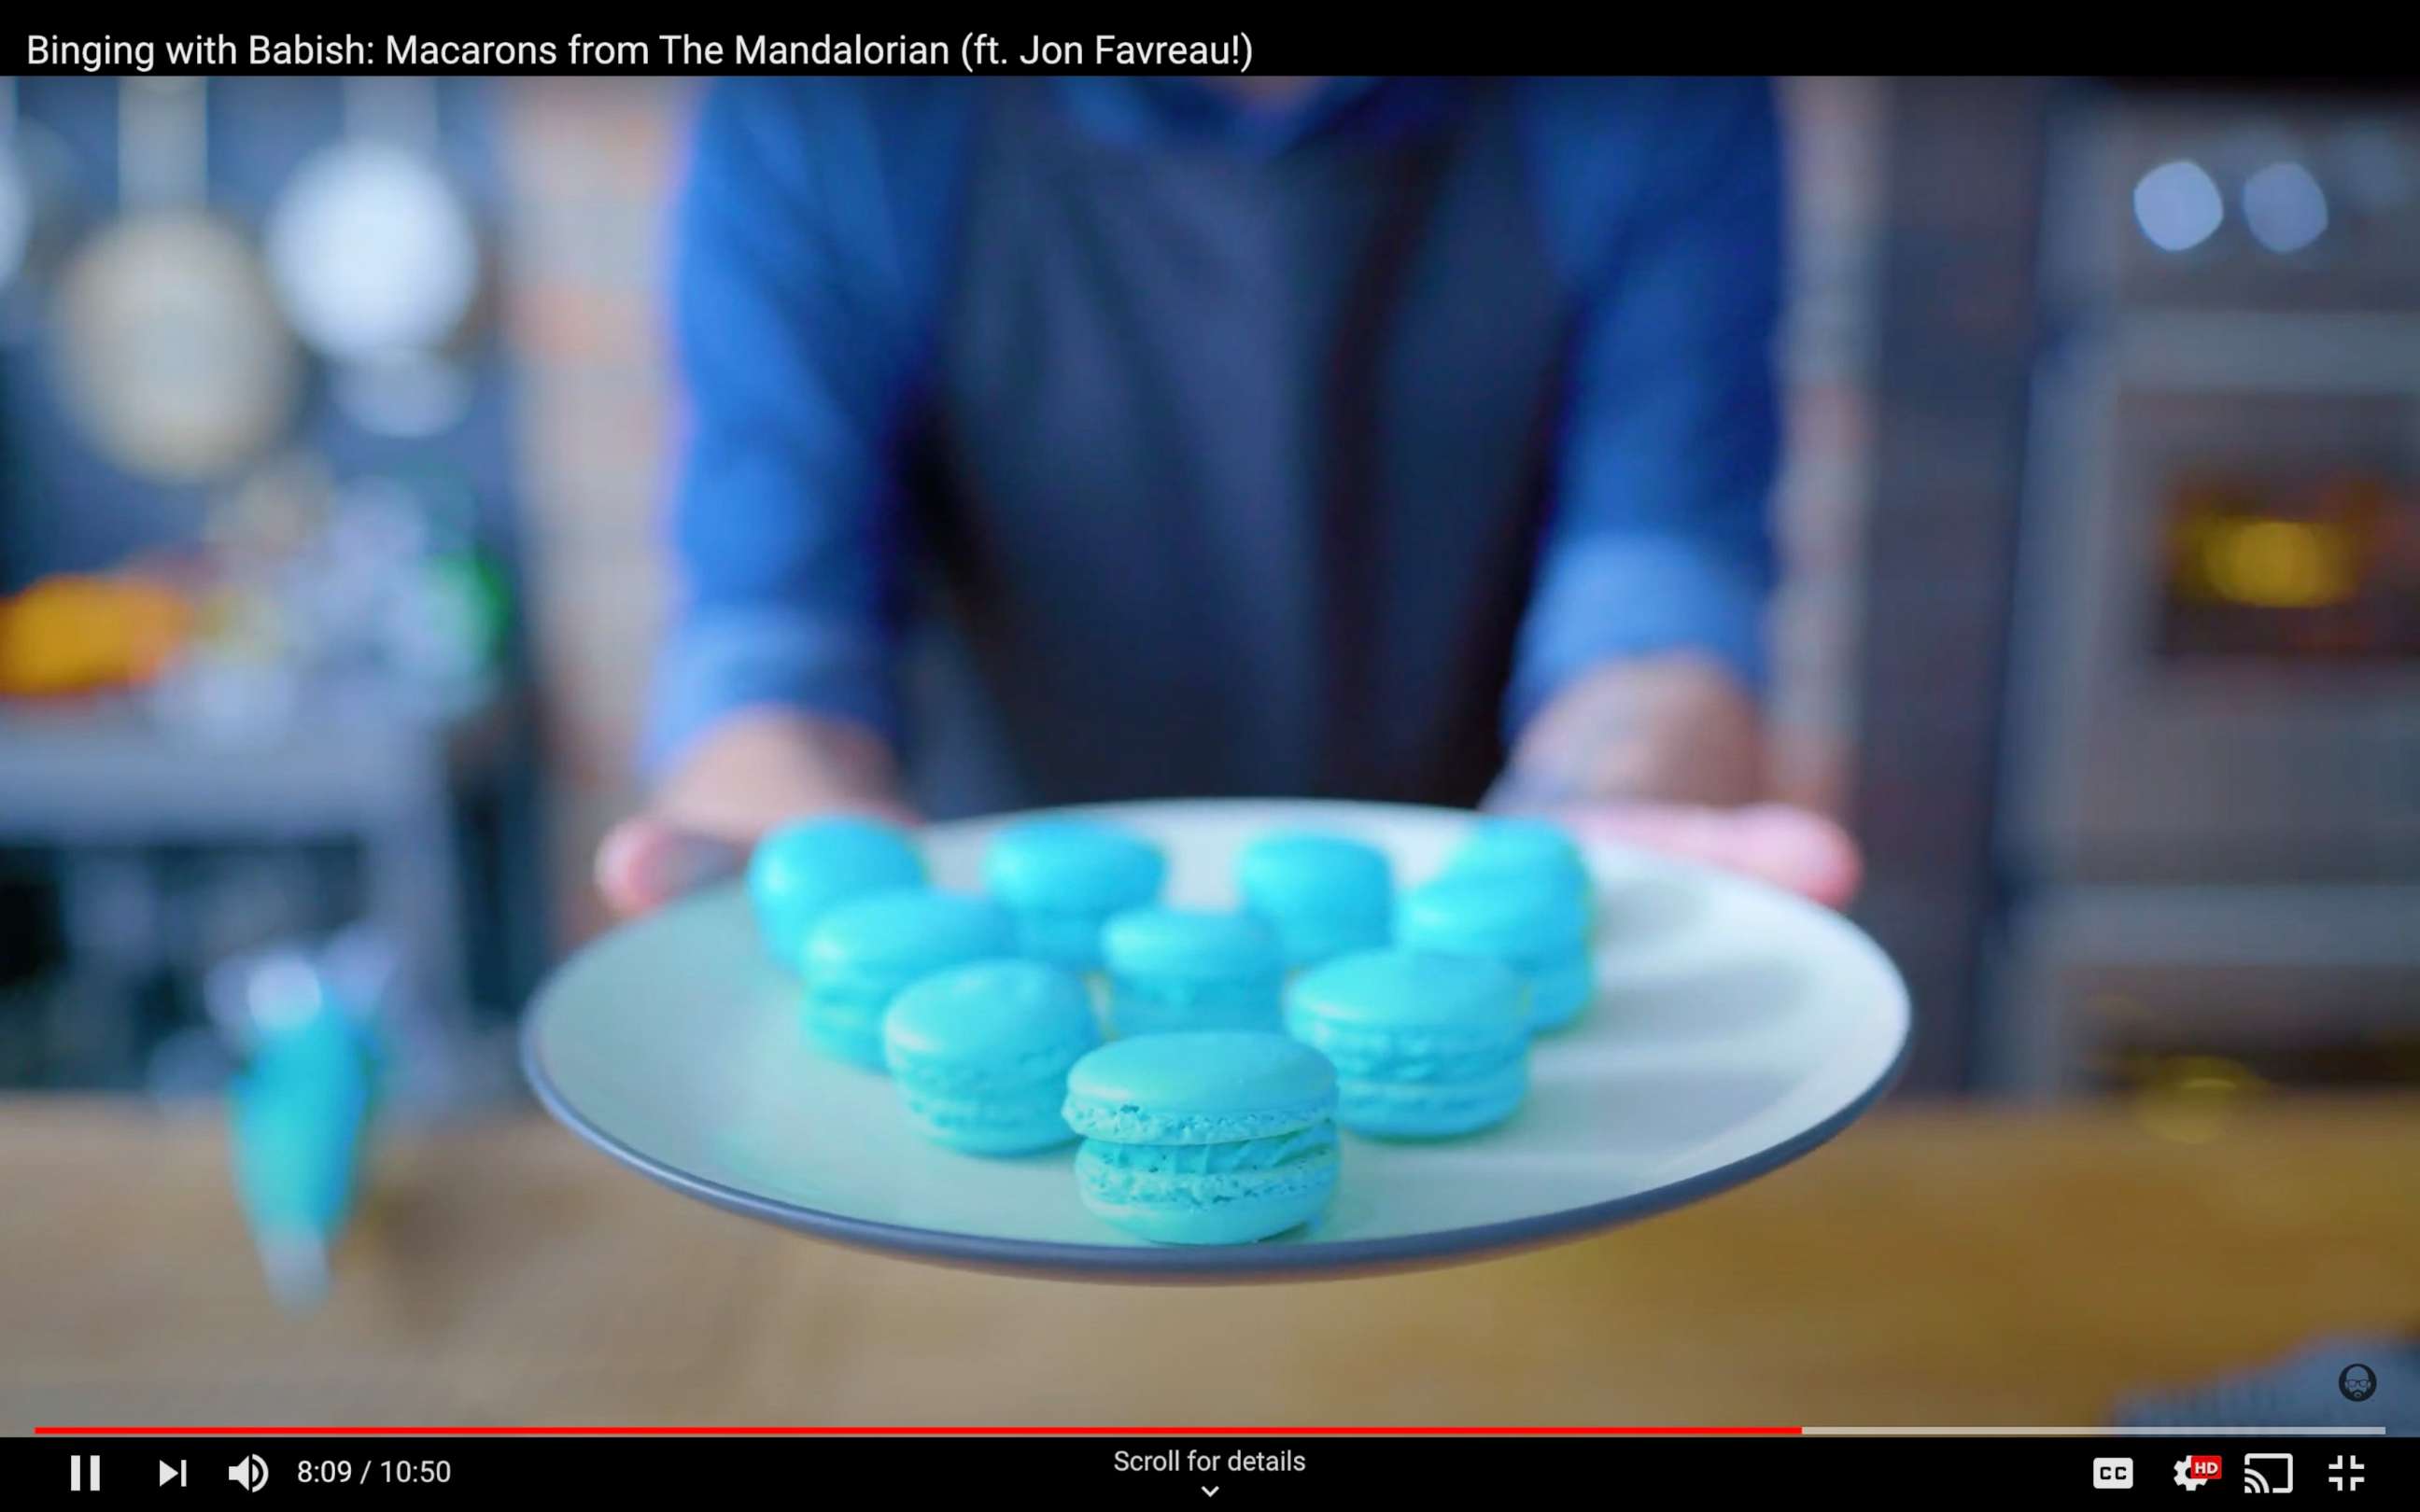 PHOTO: Andrew Rae recreated blue macarons from "The Mandalorian" on "Binging with Babish."